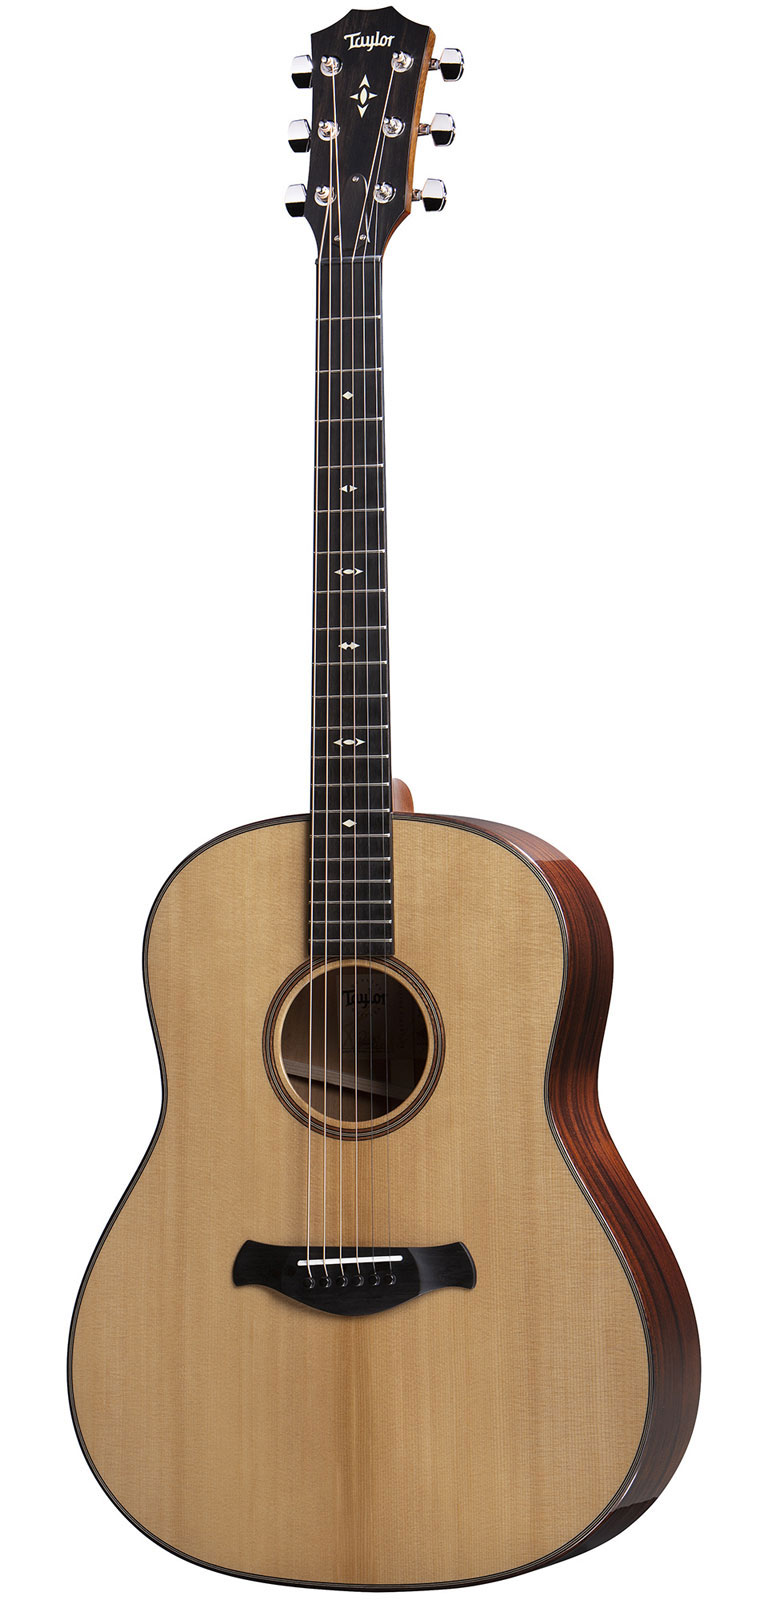 TAYLOR GUITARS BUILDER'S EDITION 517 GRAND PACIFIC DREADNOUGHT